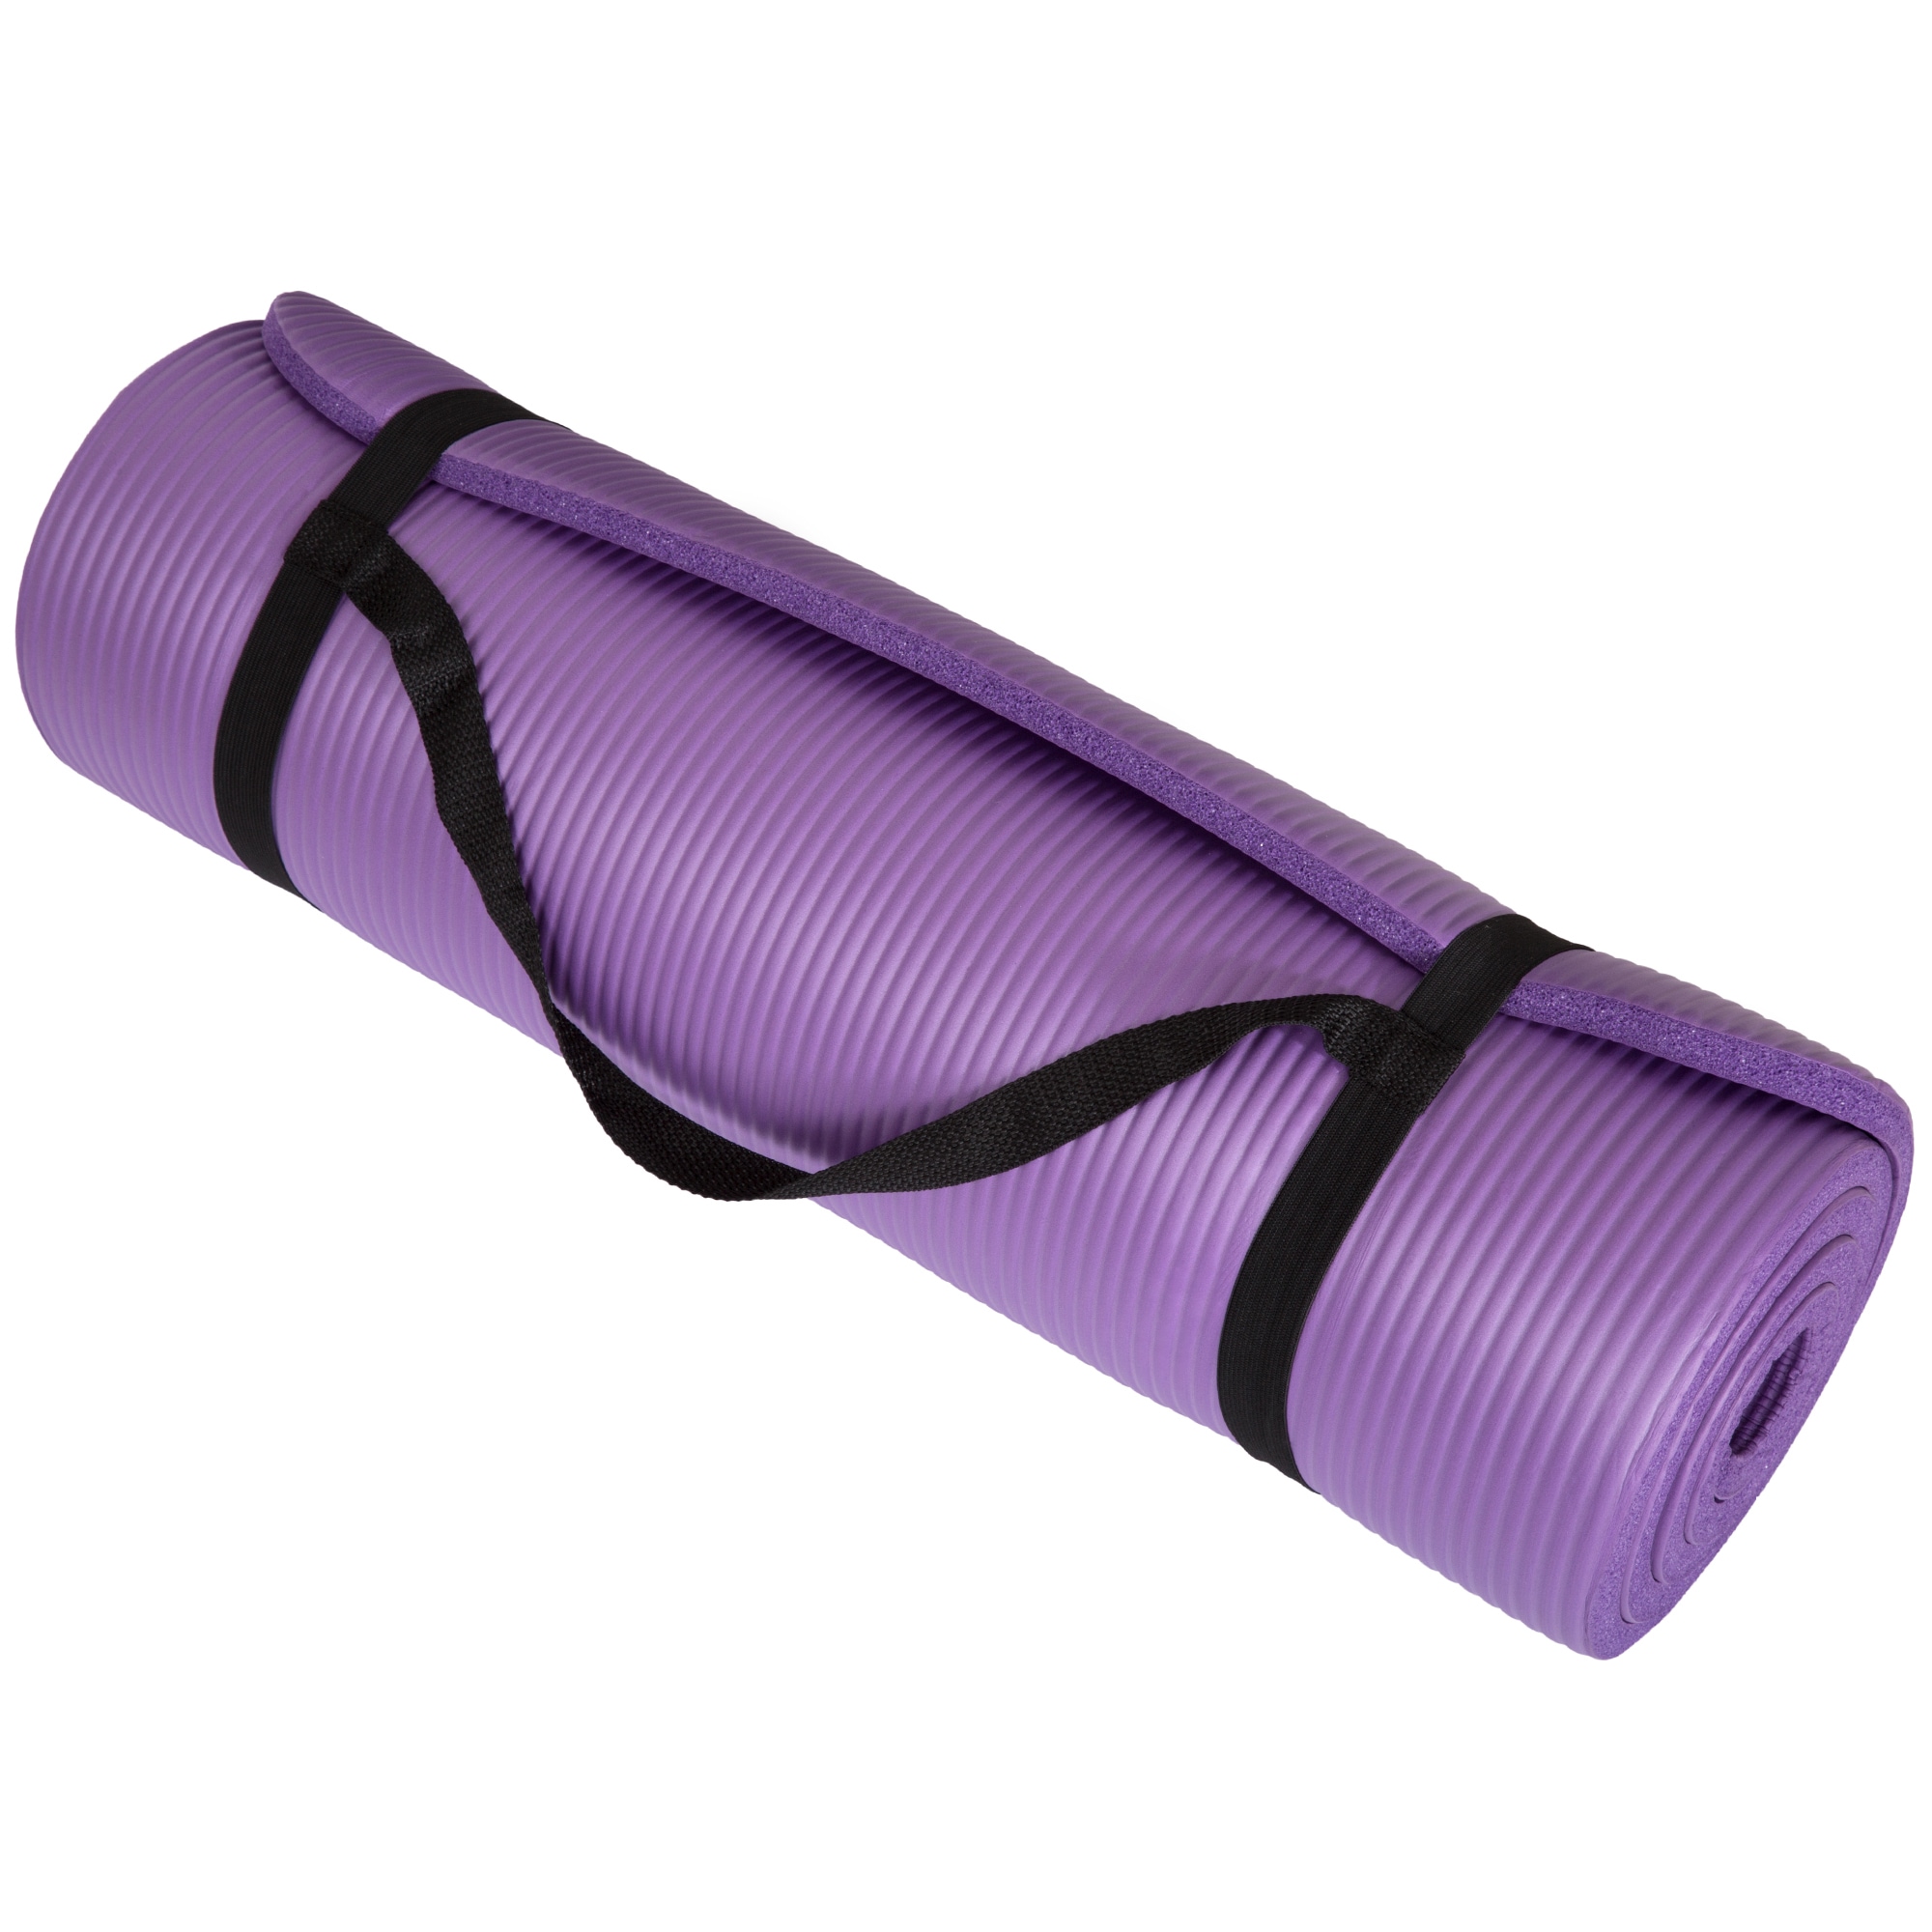 Thick Yoga Mat - Double Sided 1/2-Inch Workout Mat - 71x24-Inch Exercise  Mat for Home Gym Fitness by Wakeman - 71 x 24 x 0.5